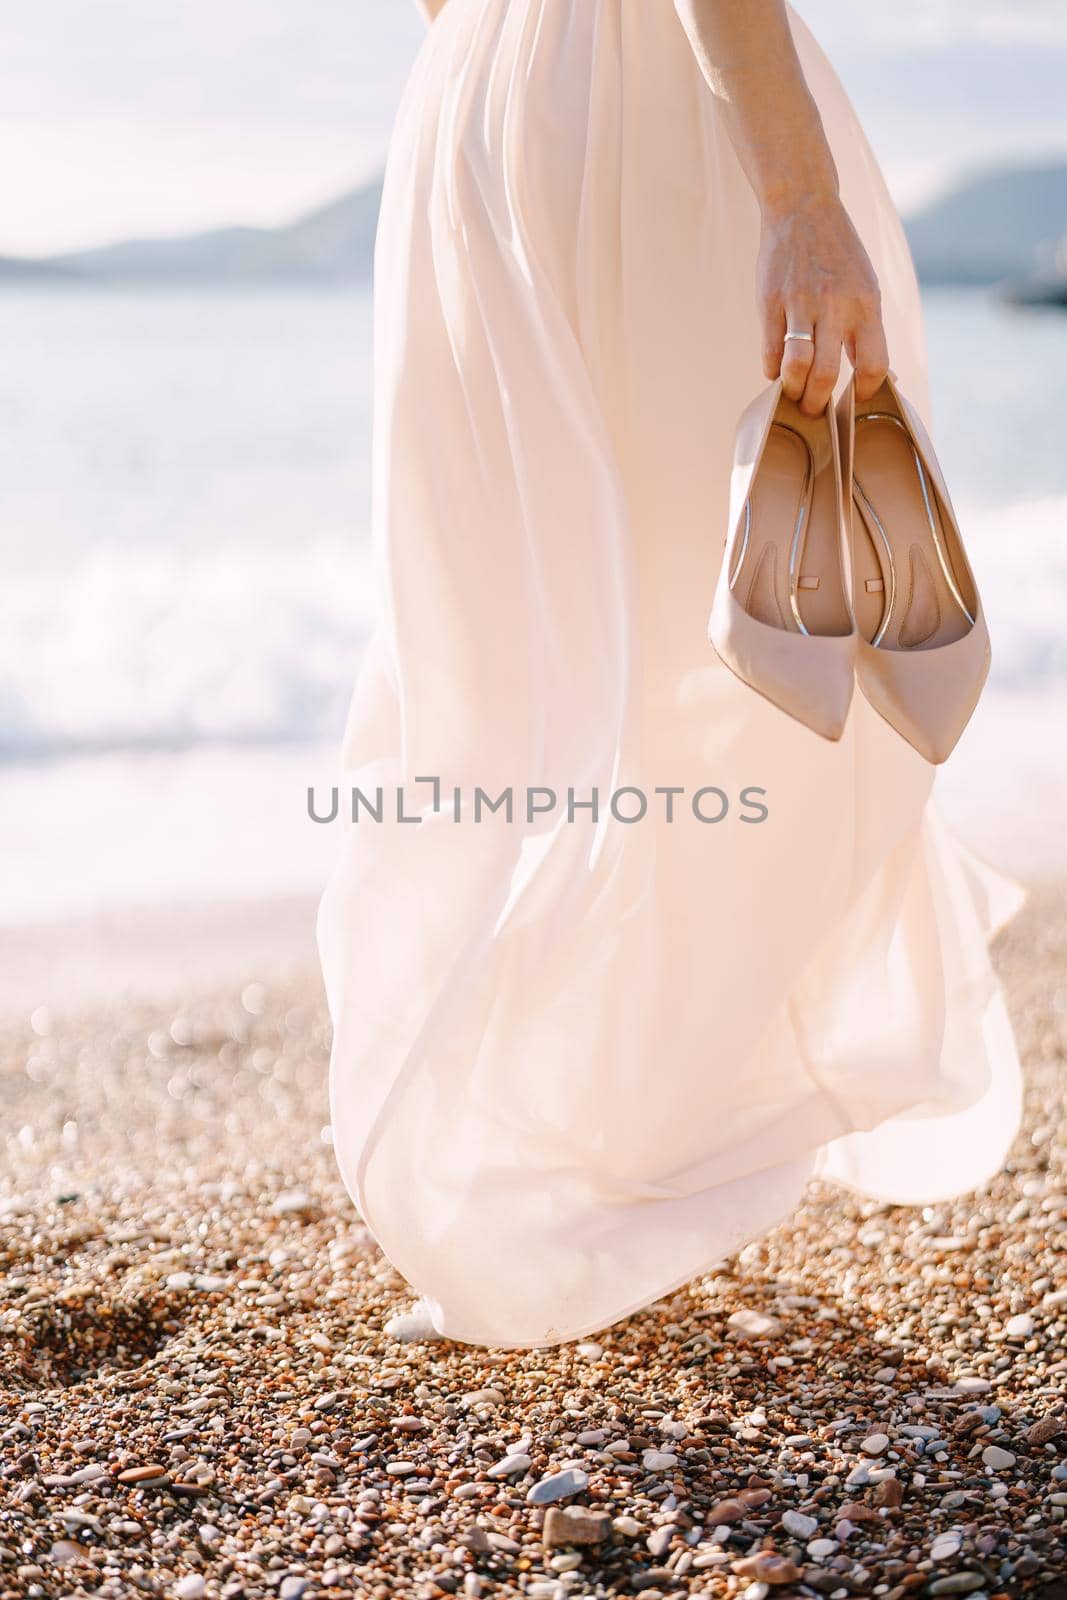 Bride with high-heeled shoes in her hand walks along the beach. Close-up by Nadtochiy